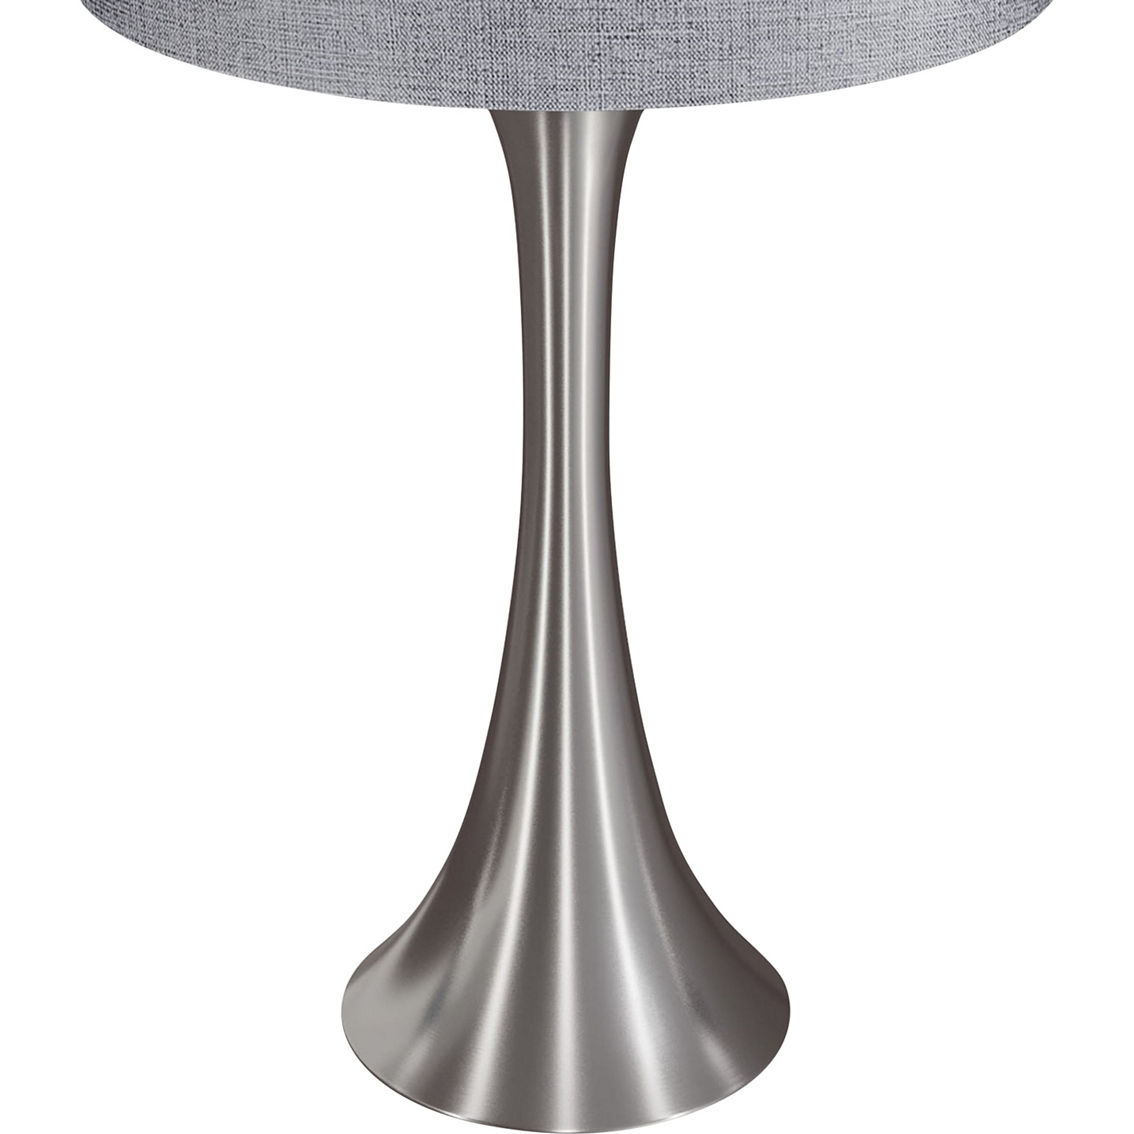 LumiSource Lenuxe 24.25 in. Metal Table Lamp 2 pk. - Image 7 of 9